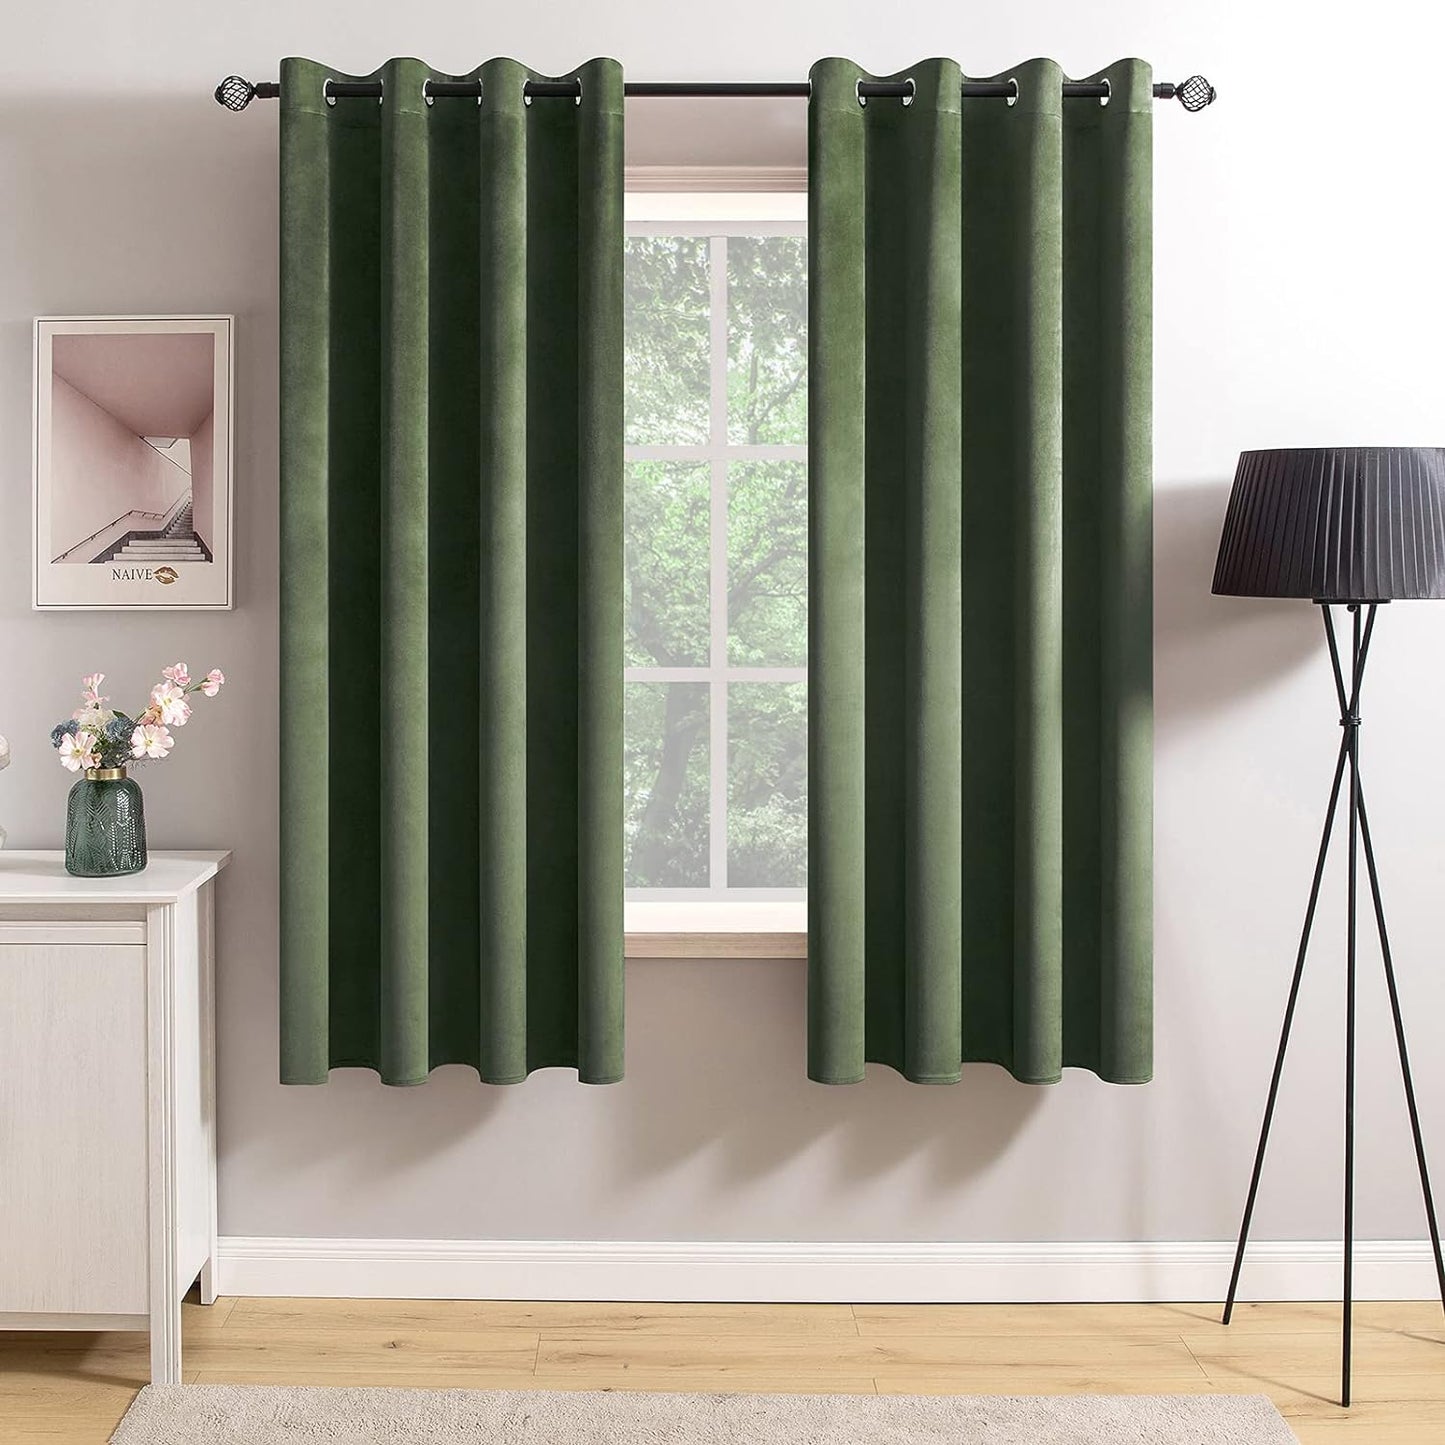 MIULEE Velvet Curtains Olive Green Elegant Grommet Curtains Thermal Insulated Soundproof Room Darkening Curtains/Drapes for Classical Living Room Bedroom Decor 52 X 84 Inch Set of 2  MIULEE Olive Green W52 X L63 